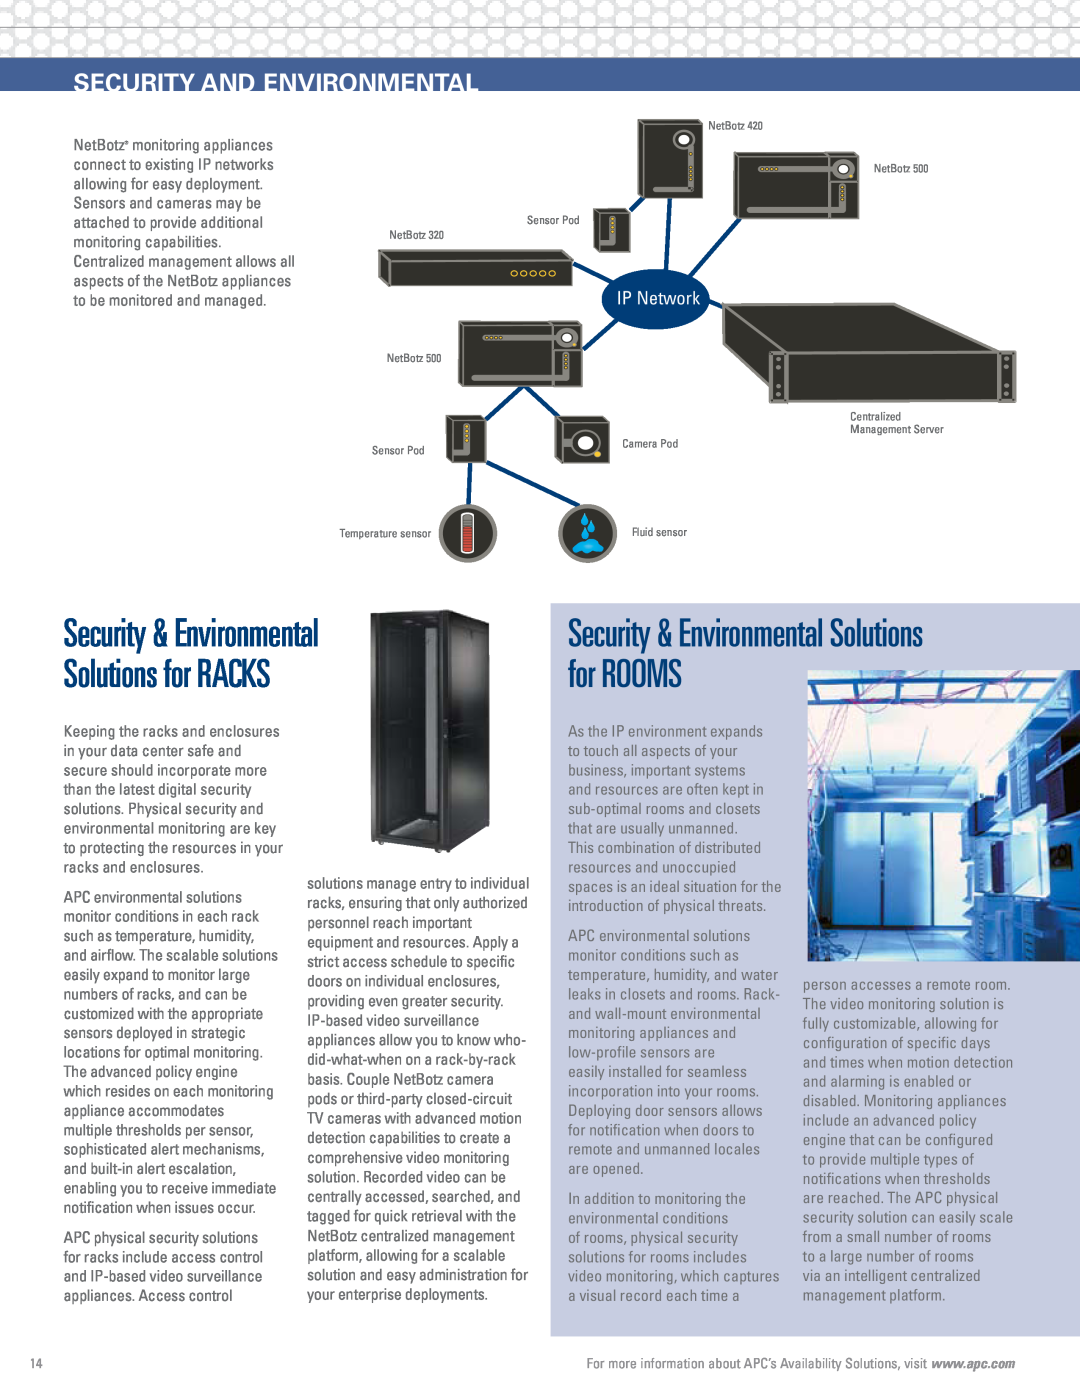 APC Rack Systems manual security and environmental, Security & Environmental Solutions for Rooms, IP Network 